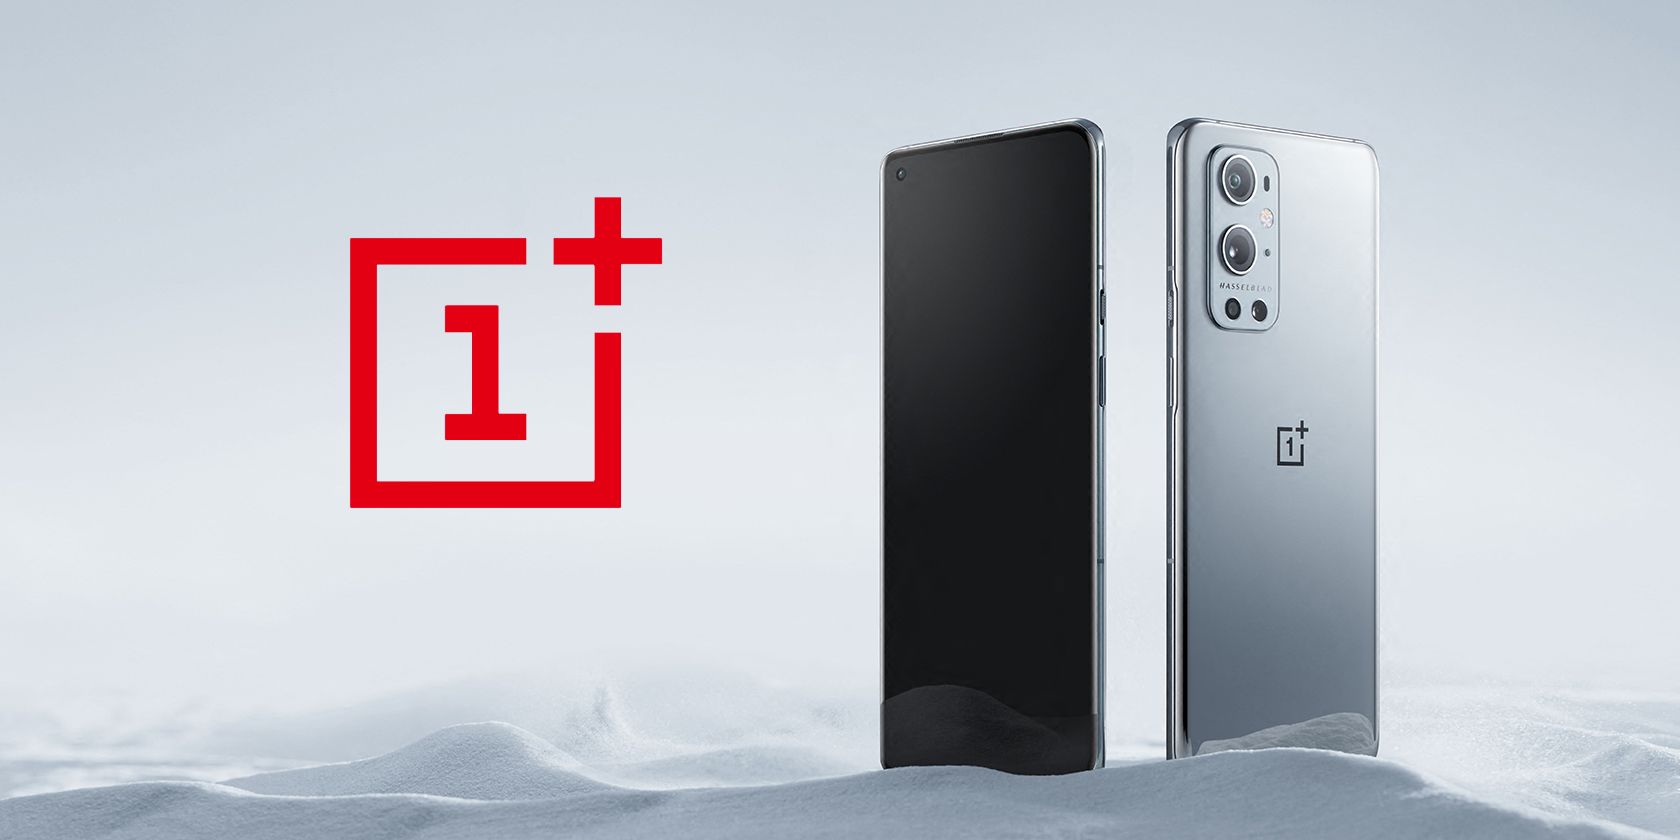 The OnePlus logo over white, with two OnePlus devices.